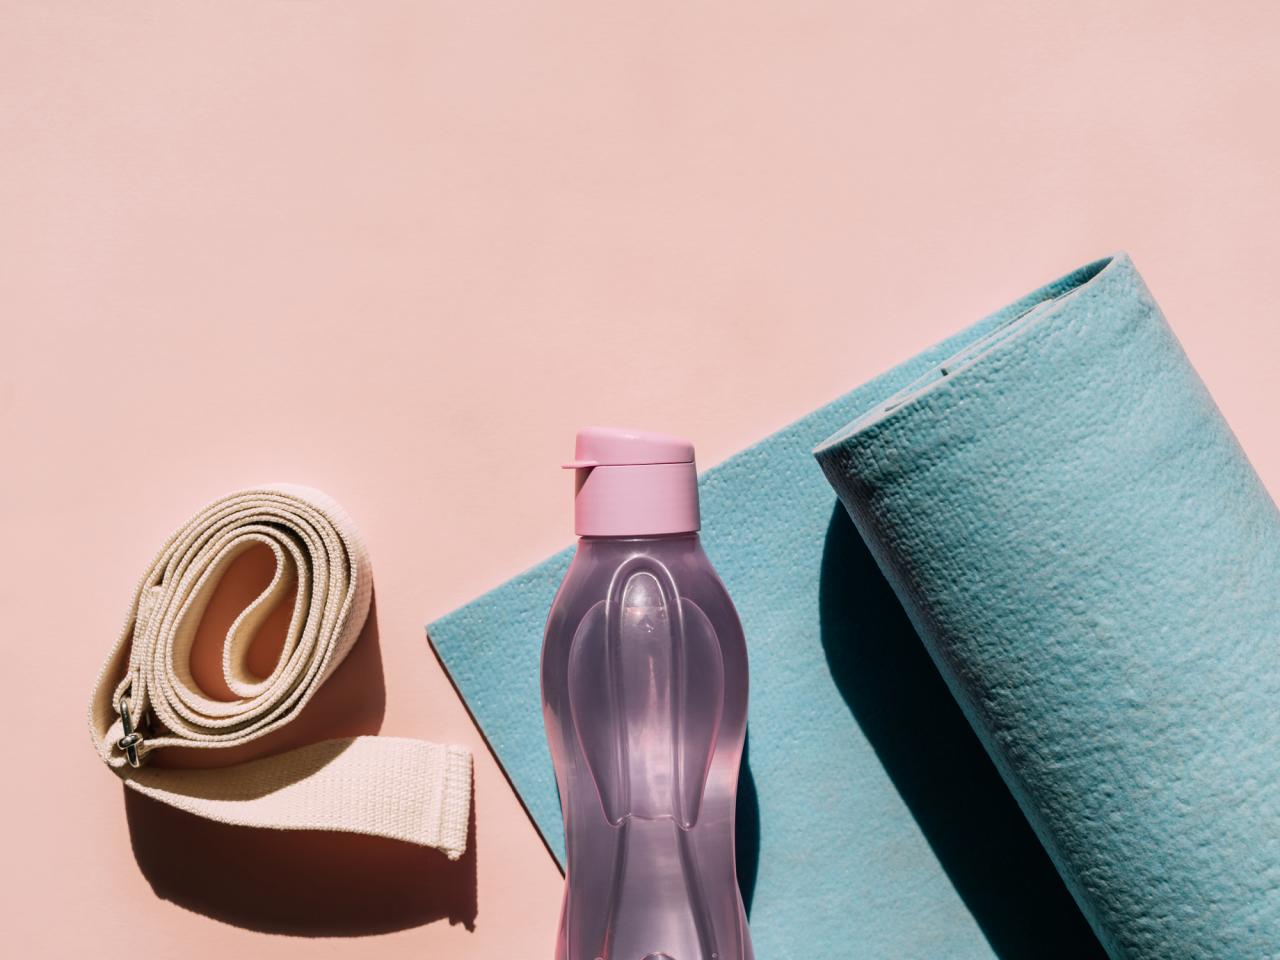 Reusable Water Bottle: Facts and Benefits